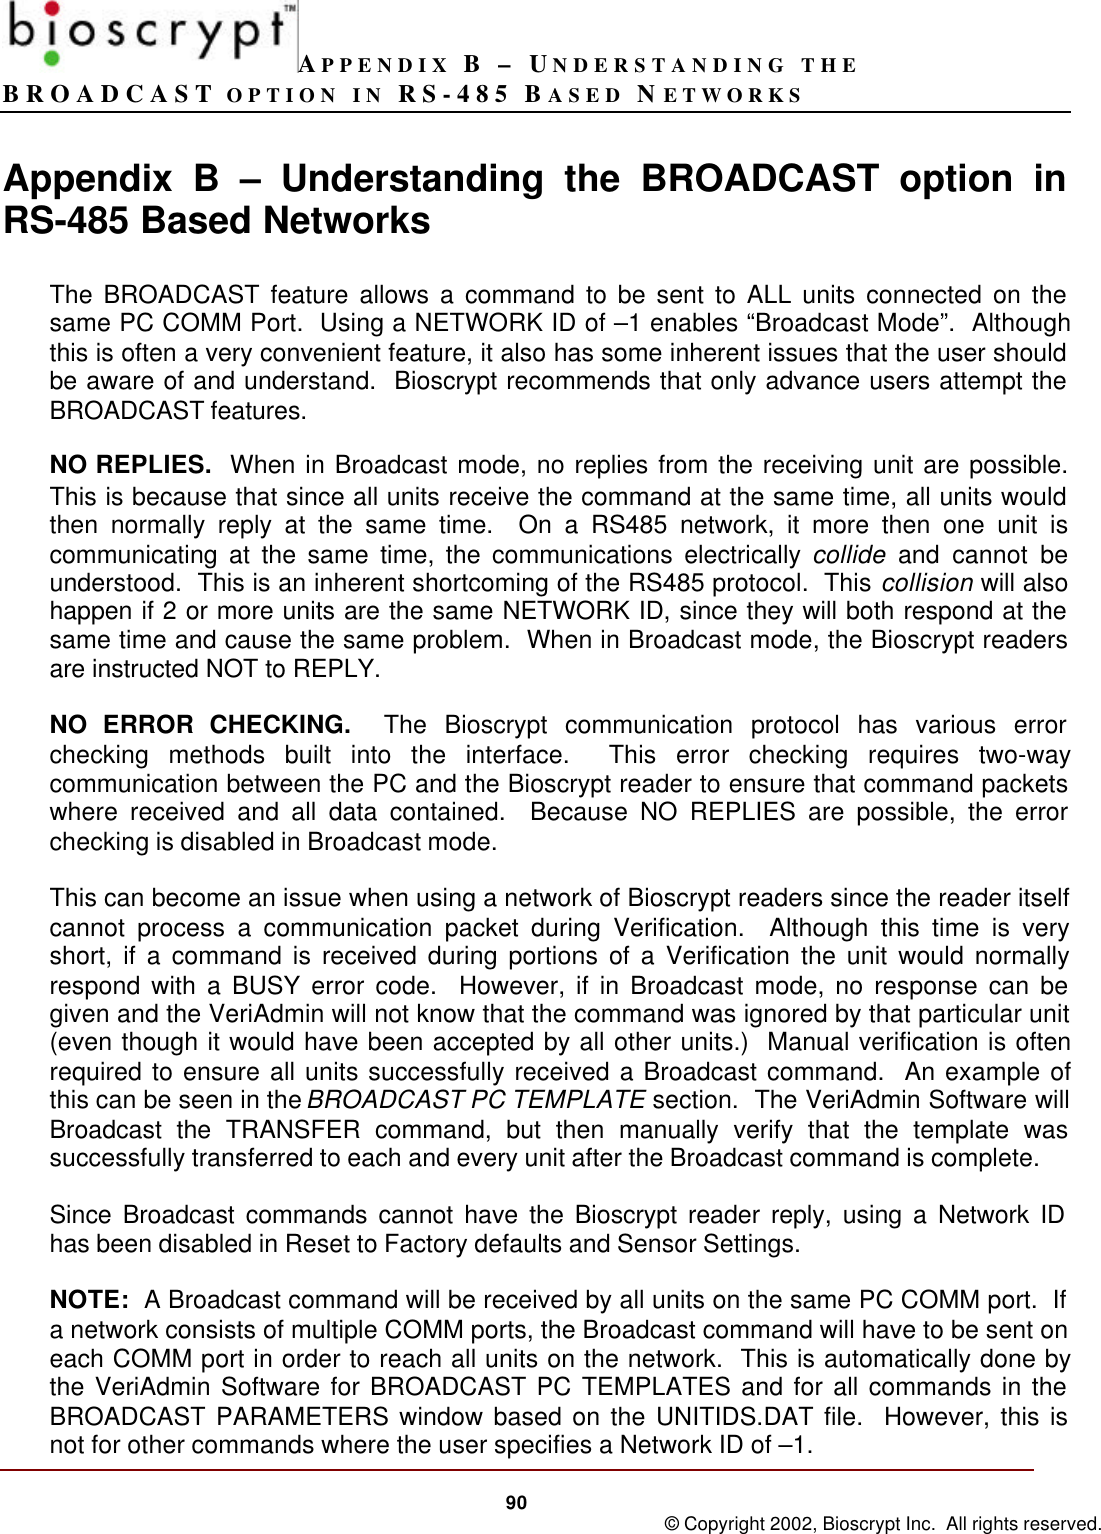 APPENDIX B – UNDERSTANDING THEBROADCAST OPTION IN RS-485 BASED NETWORKS90 © Copyright 2002, Bioscrypt Inc.  All rights reserved.Appendix B – Understanding the BROADCAST option inRS-485 Based NetworksThe BROADCAST feature allows a command to be sent to ALL units connected on thesame PC COMM Port.  Using a NETWORK ID of –1 enables “Broadcast Mode”.  Althoughthis is often a very convenient feature, it also has some inherent issues that the user shouldbe aware of and understand.  Bioscrypt recommends that only advance users attempt theBROADCAST features.NO REPLIES.  When in Broadcast mode, no replies from the receiving unit are possible.This is because that since all units receive the command at the same time, all units wouldthen normally reply at the same time.  On a RS485 network, it more then one unit iscommunicating at the same time, the communications electrically collide and cannot beunderstood.  This is an inherent shortcoming of the RS485 protocol.  This collision will alsohappen if 2 or more units are the same NETWORK ID, since they will both respond at thesame time and cause the same problem.  When in Broadcast mode, the Bioscrypt readersare instructed NOT to REPLY.NO ERROR CHECKING.  The Bioscrypt communication protocol has various errorchecking methods built into the interface.  This error checking requires two-waycommunication between the PC and the Bioscrypt reader to ensure that command packetswhere received and all data contained.  Because NO REPLIES are possible, the errorchecking is disabled in Broadcast mode.This can become an issue when using a network of Bioscrypt readers since the reader itselfcannot process a communication packet during Verification.  Although this time is veryshort, if a command is received during portions of a Verification the unit would normallyrespond with a BUSY error code.  However, if in Broadcast mode, no response can begiven and the VeriAdmin will not know that the command was ignored by that particular unit(even though it would have been accepted by all other units.)  Manual verification is oftenrequired to ensure all units successfully received a Broadcast command.  An example ofthis can be seen in the BROADCAST PC TEMPLATE section.  The VeriAdmin Software willBroadcast the TRANSFER command, but then manually verify that the template wassuccessfully transferred to each and every unit after the Broadcast command is complete.Since Broadcast commands cannot have the Bioscrypt reader reply, using a Network IDhas been disabled in Reset to Factory defaults and Sensor Settings.NOTE:  A Broadcast command will be received by all units on the same PC COMM port.  Ifa network consists of multiple COMM ports, the Broadcast command will have to be sent oneach COMM port in order to reach all units on the network.  This is automatically done bythe VeriAdmin Software for BROADCAST PC TEMPLATES and for all commands in theBROADCAST PARAMETERS window based on the UNITIDS.DAT file.  However, this isnot for other commands where the user specifies a Network ID of –1.